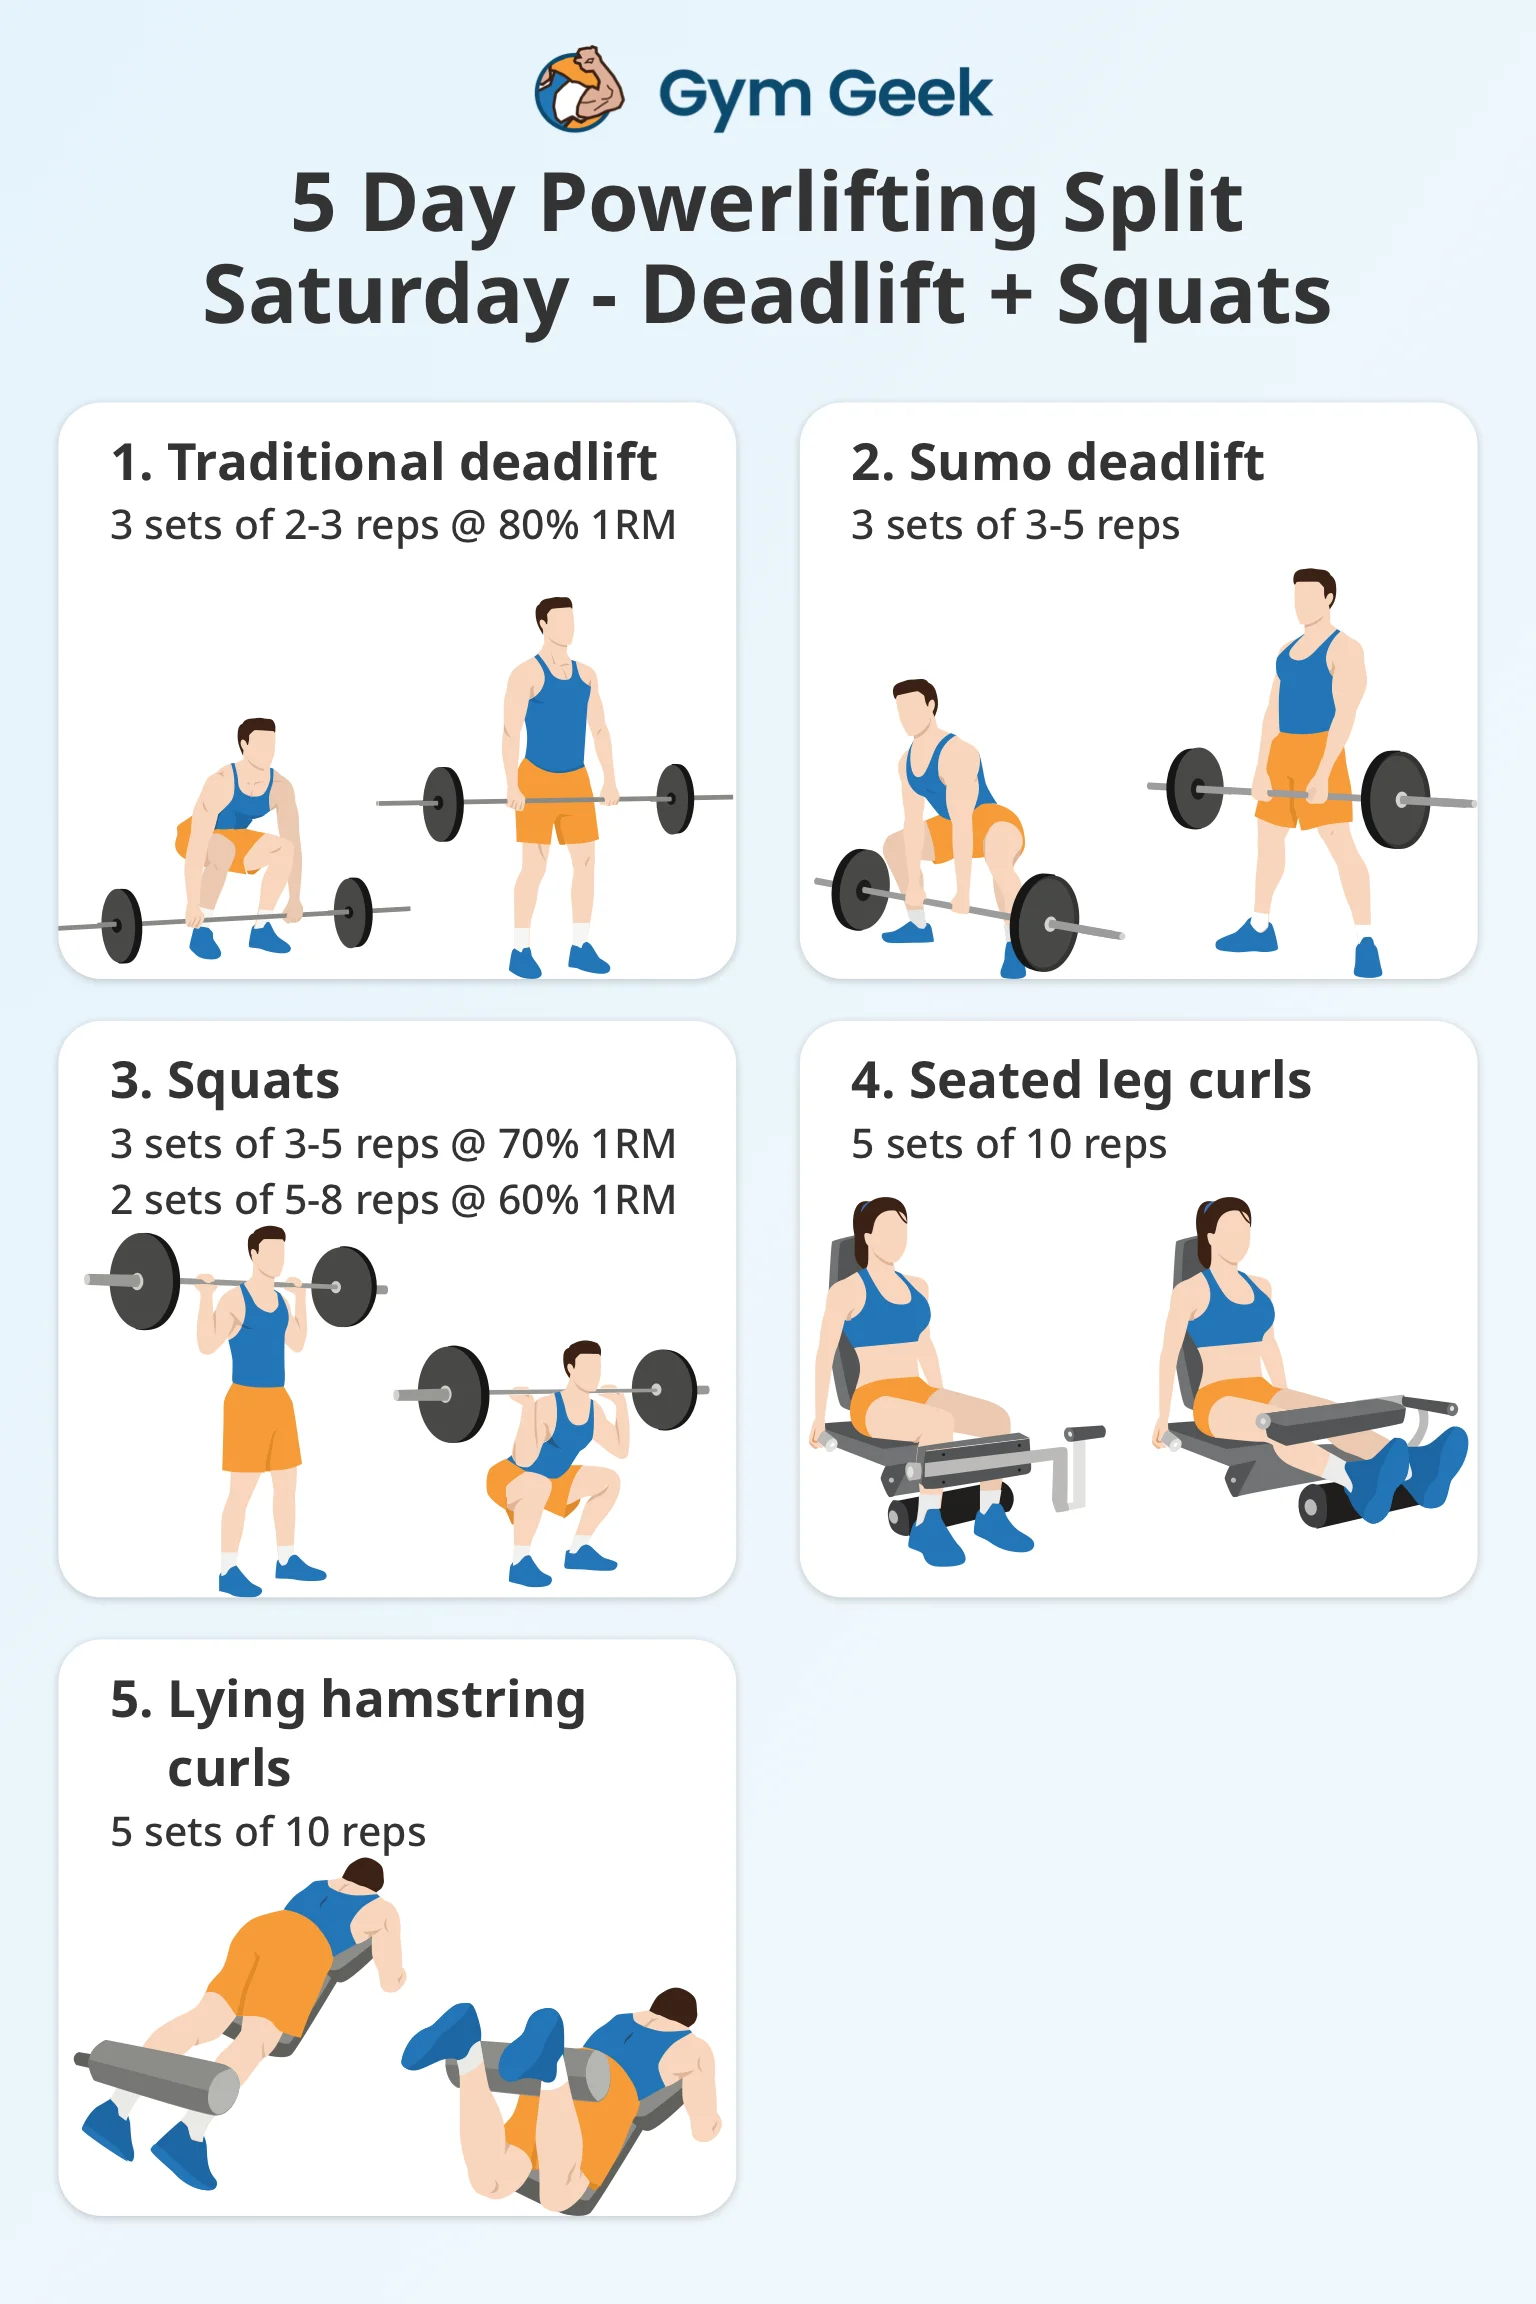 infographic - 5 day powerlifting program - Saturday (Deadlift and squats day)